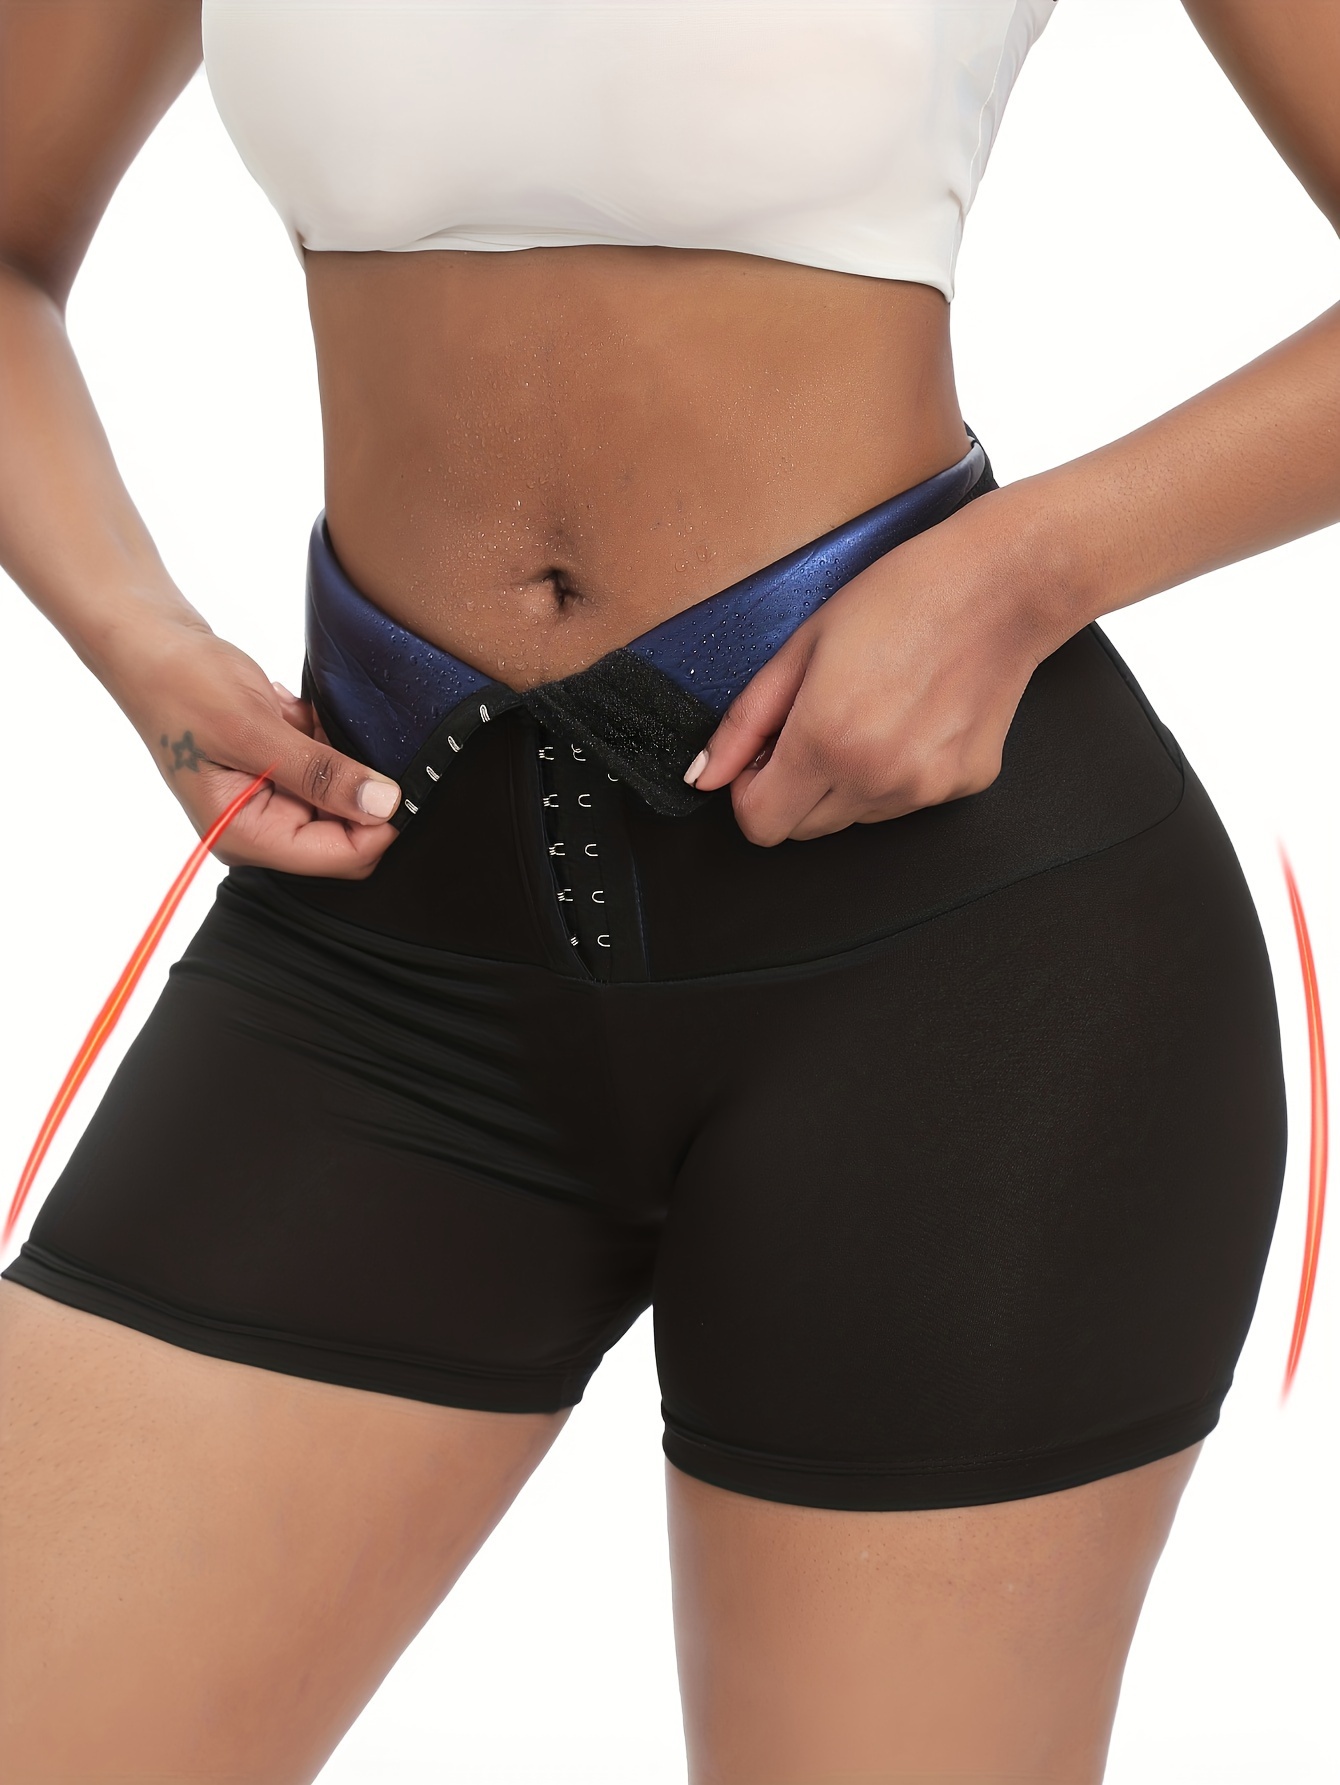 Plus Size Sporty Shapewear Shorts, Women's Plus Closure Front High Waist  Butt Lifting Slimming Workout Training Leggings, Don't Miss These Great  Deals